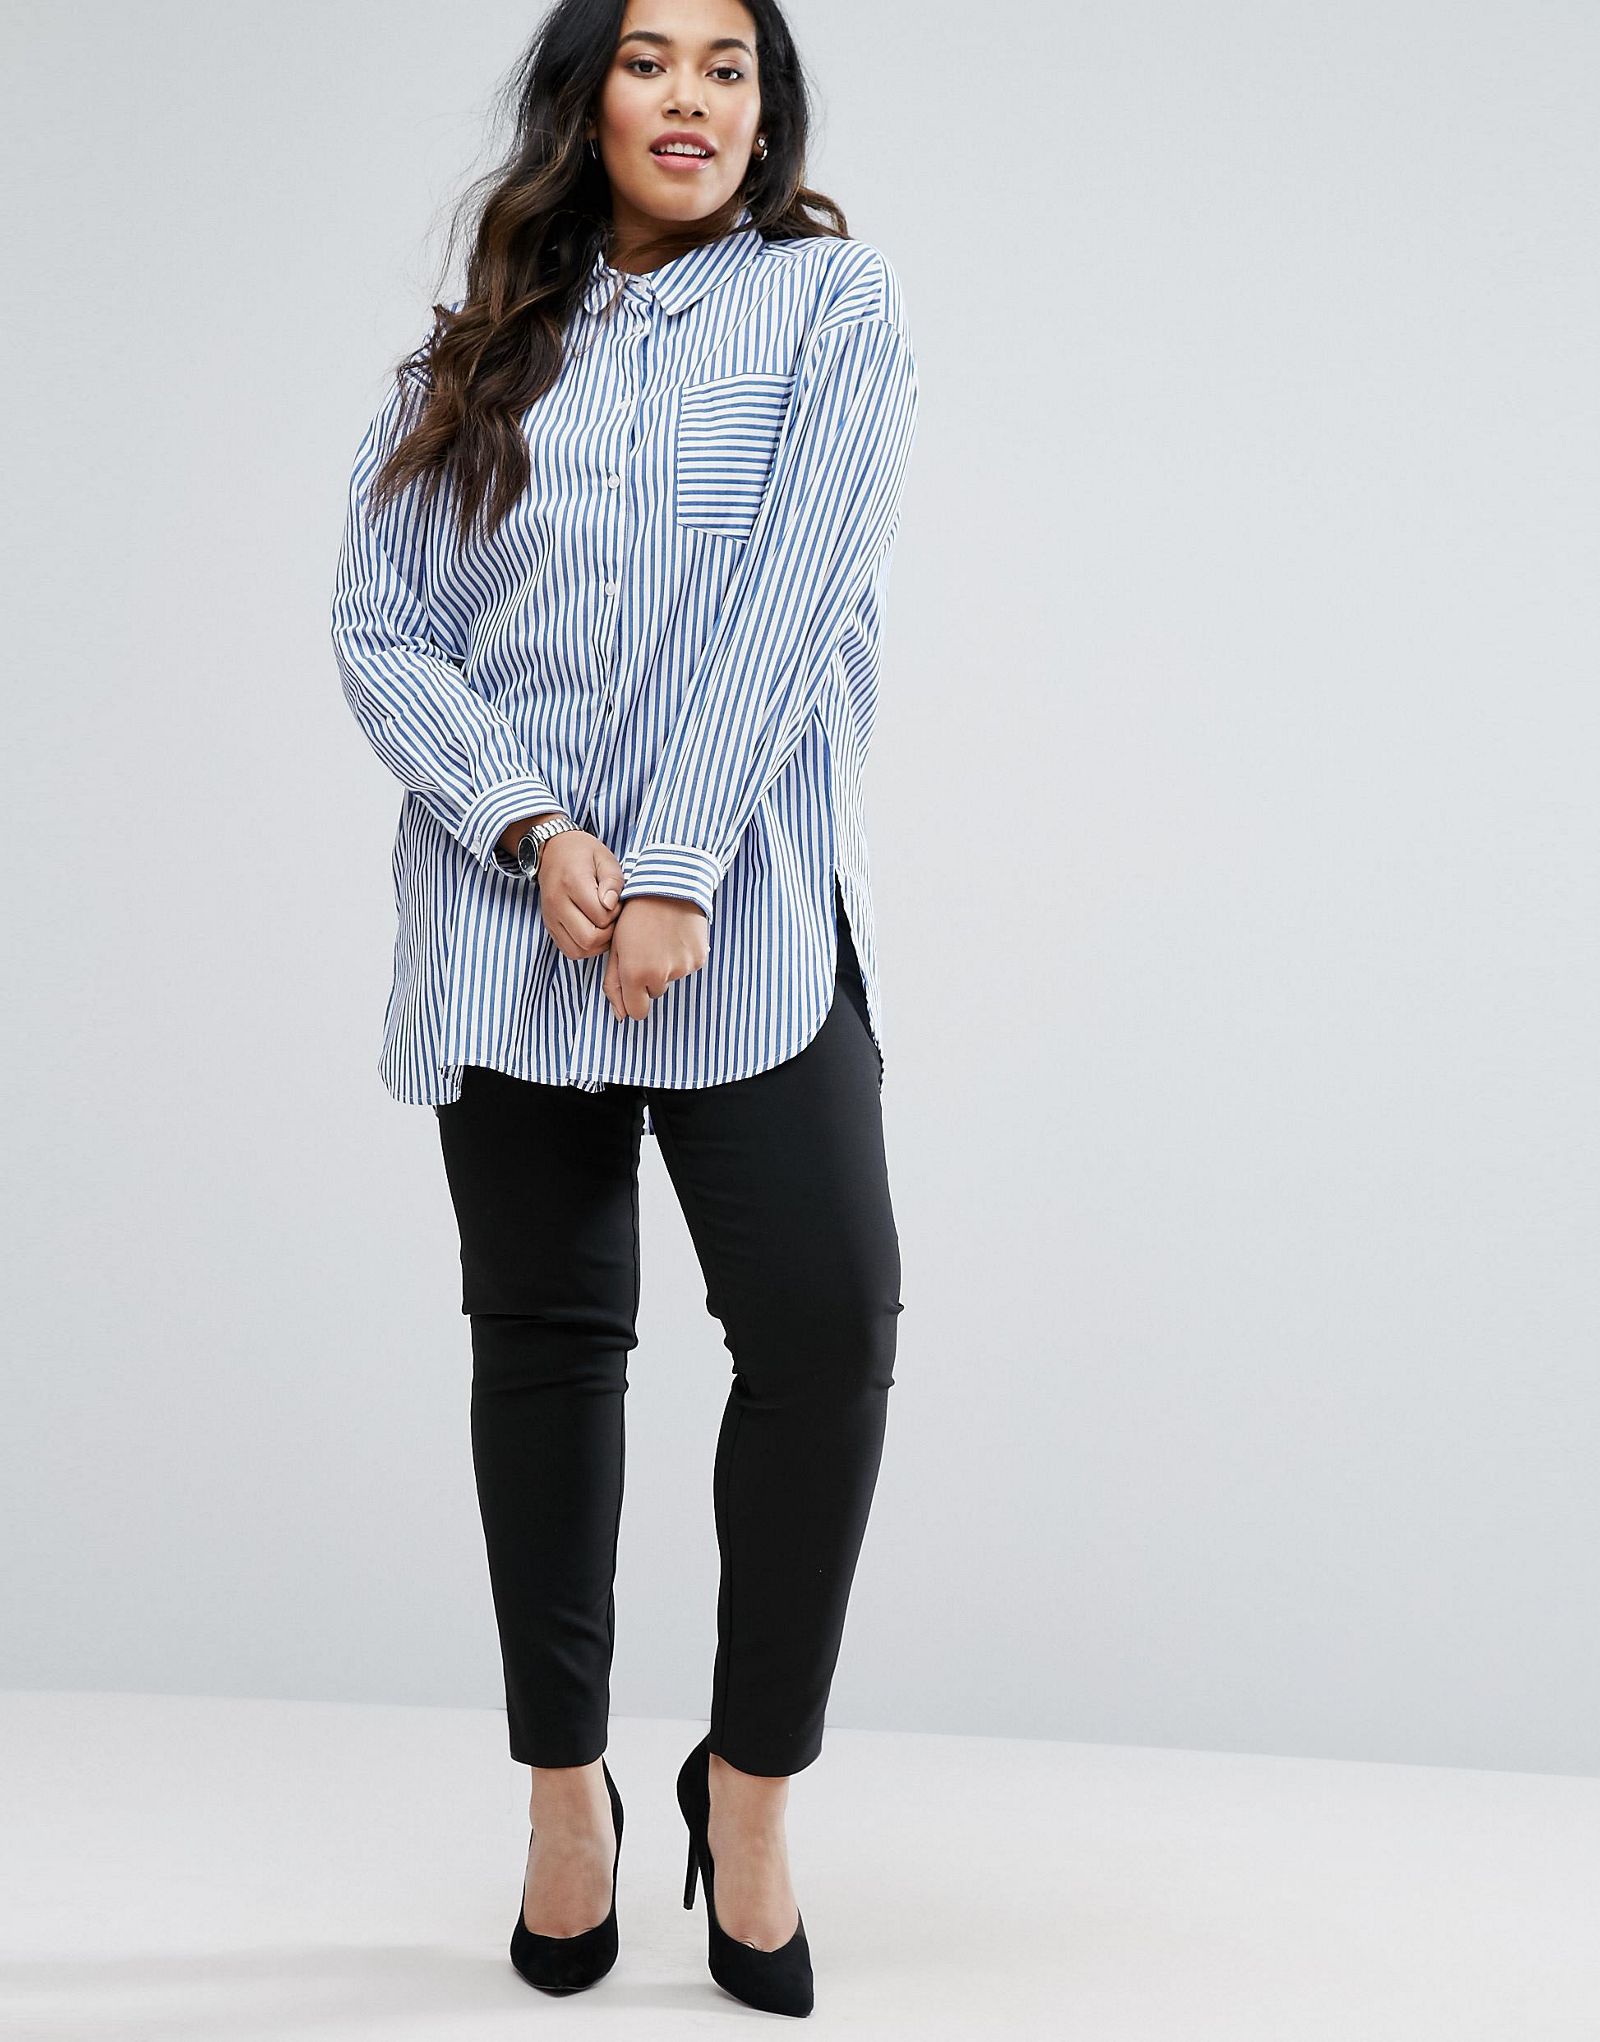 ASOS CURVE Oversized Smart Cotton Shirt in Stripe with Curved Hem